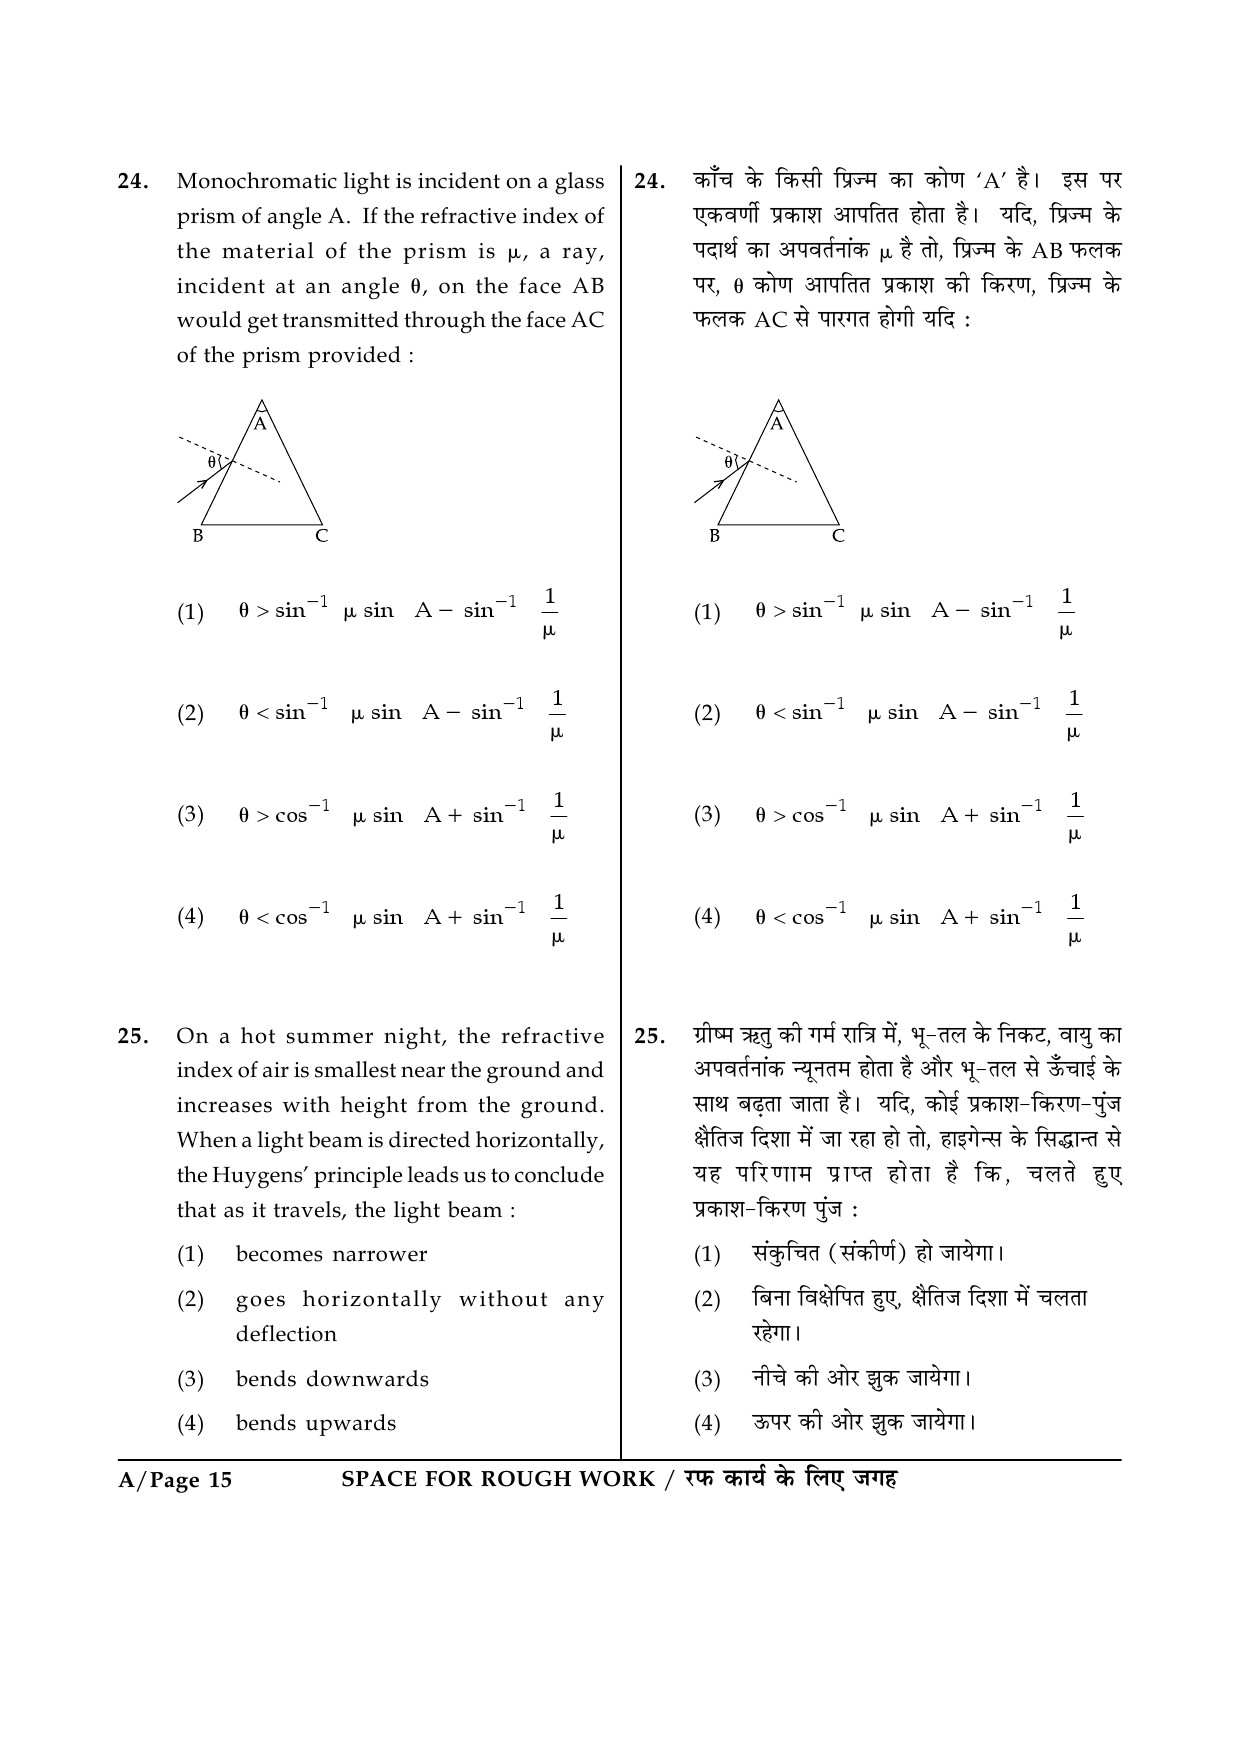 JEE Main Exam Question Paper 2015 Booklet A 15